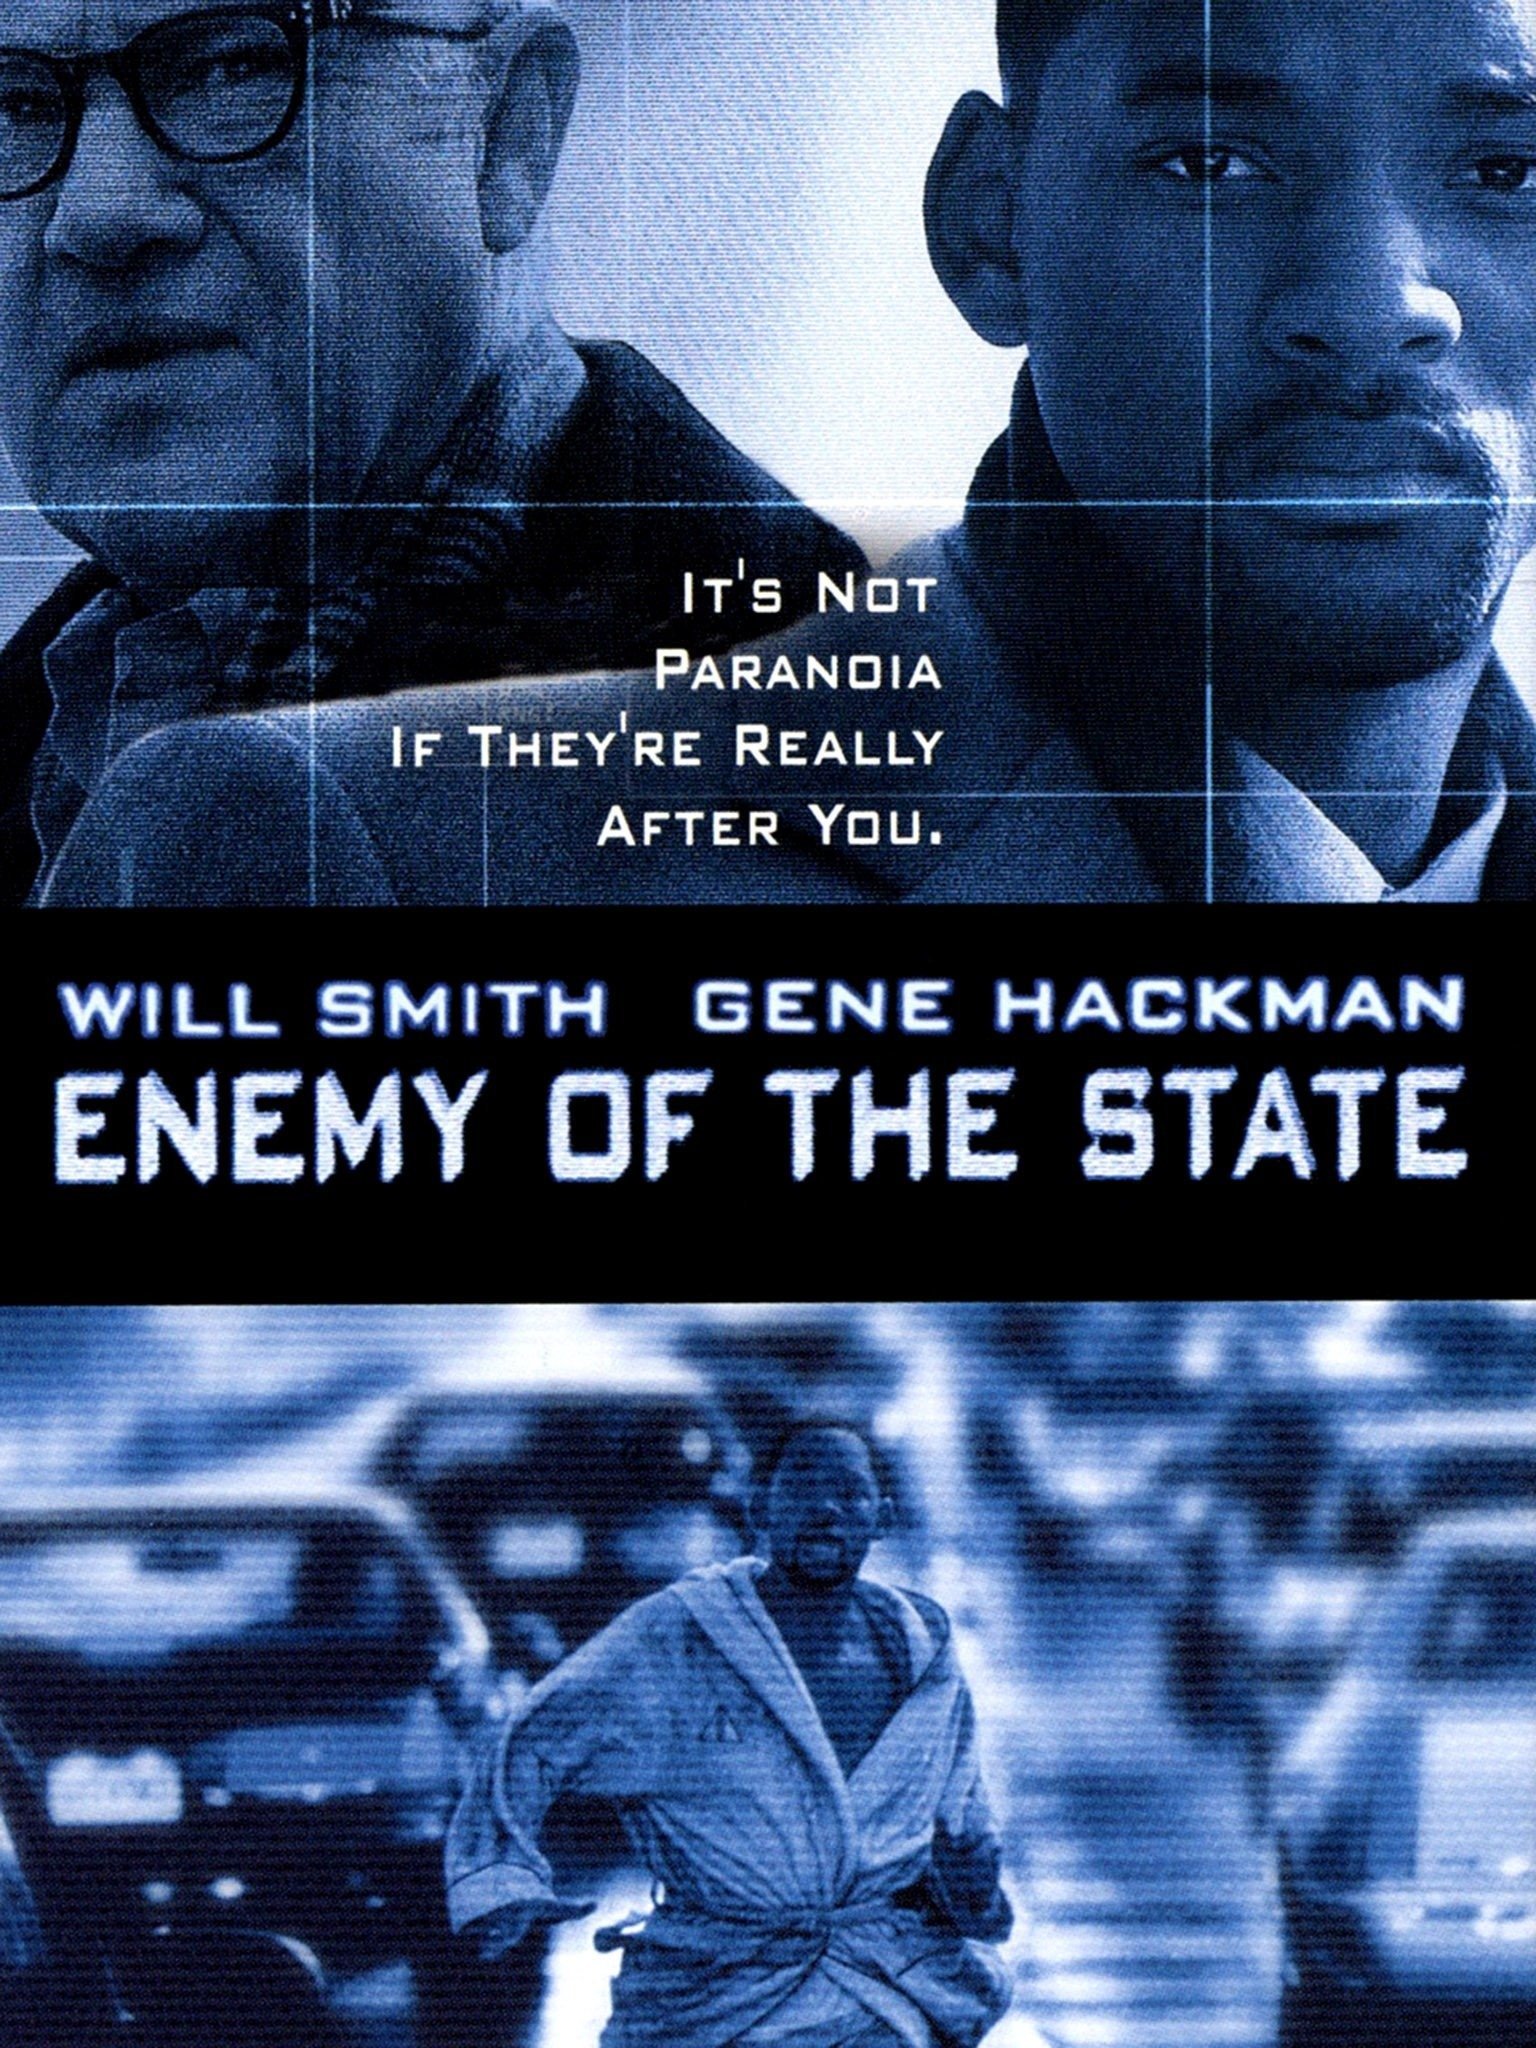 Enemy of the State: The Best Top 10 Movies to Binge Watch on Hulu